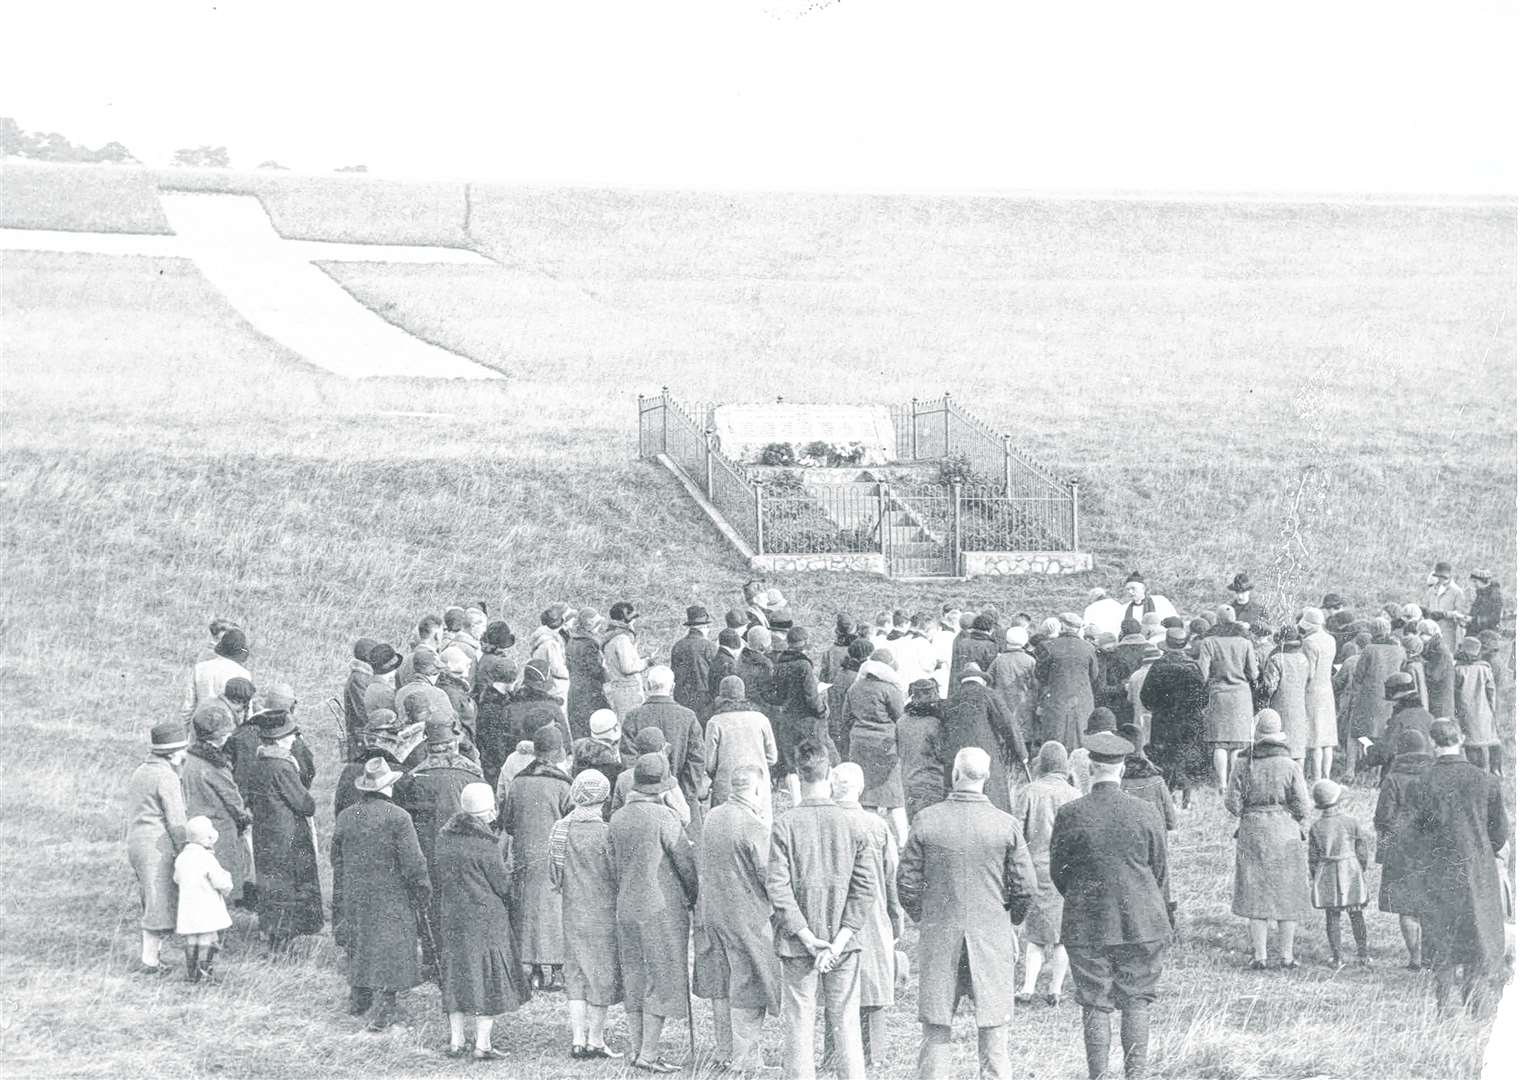 A Remembrance Day service at the Lenham Cross in 1930